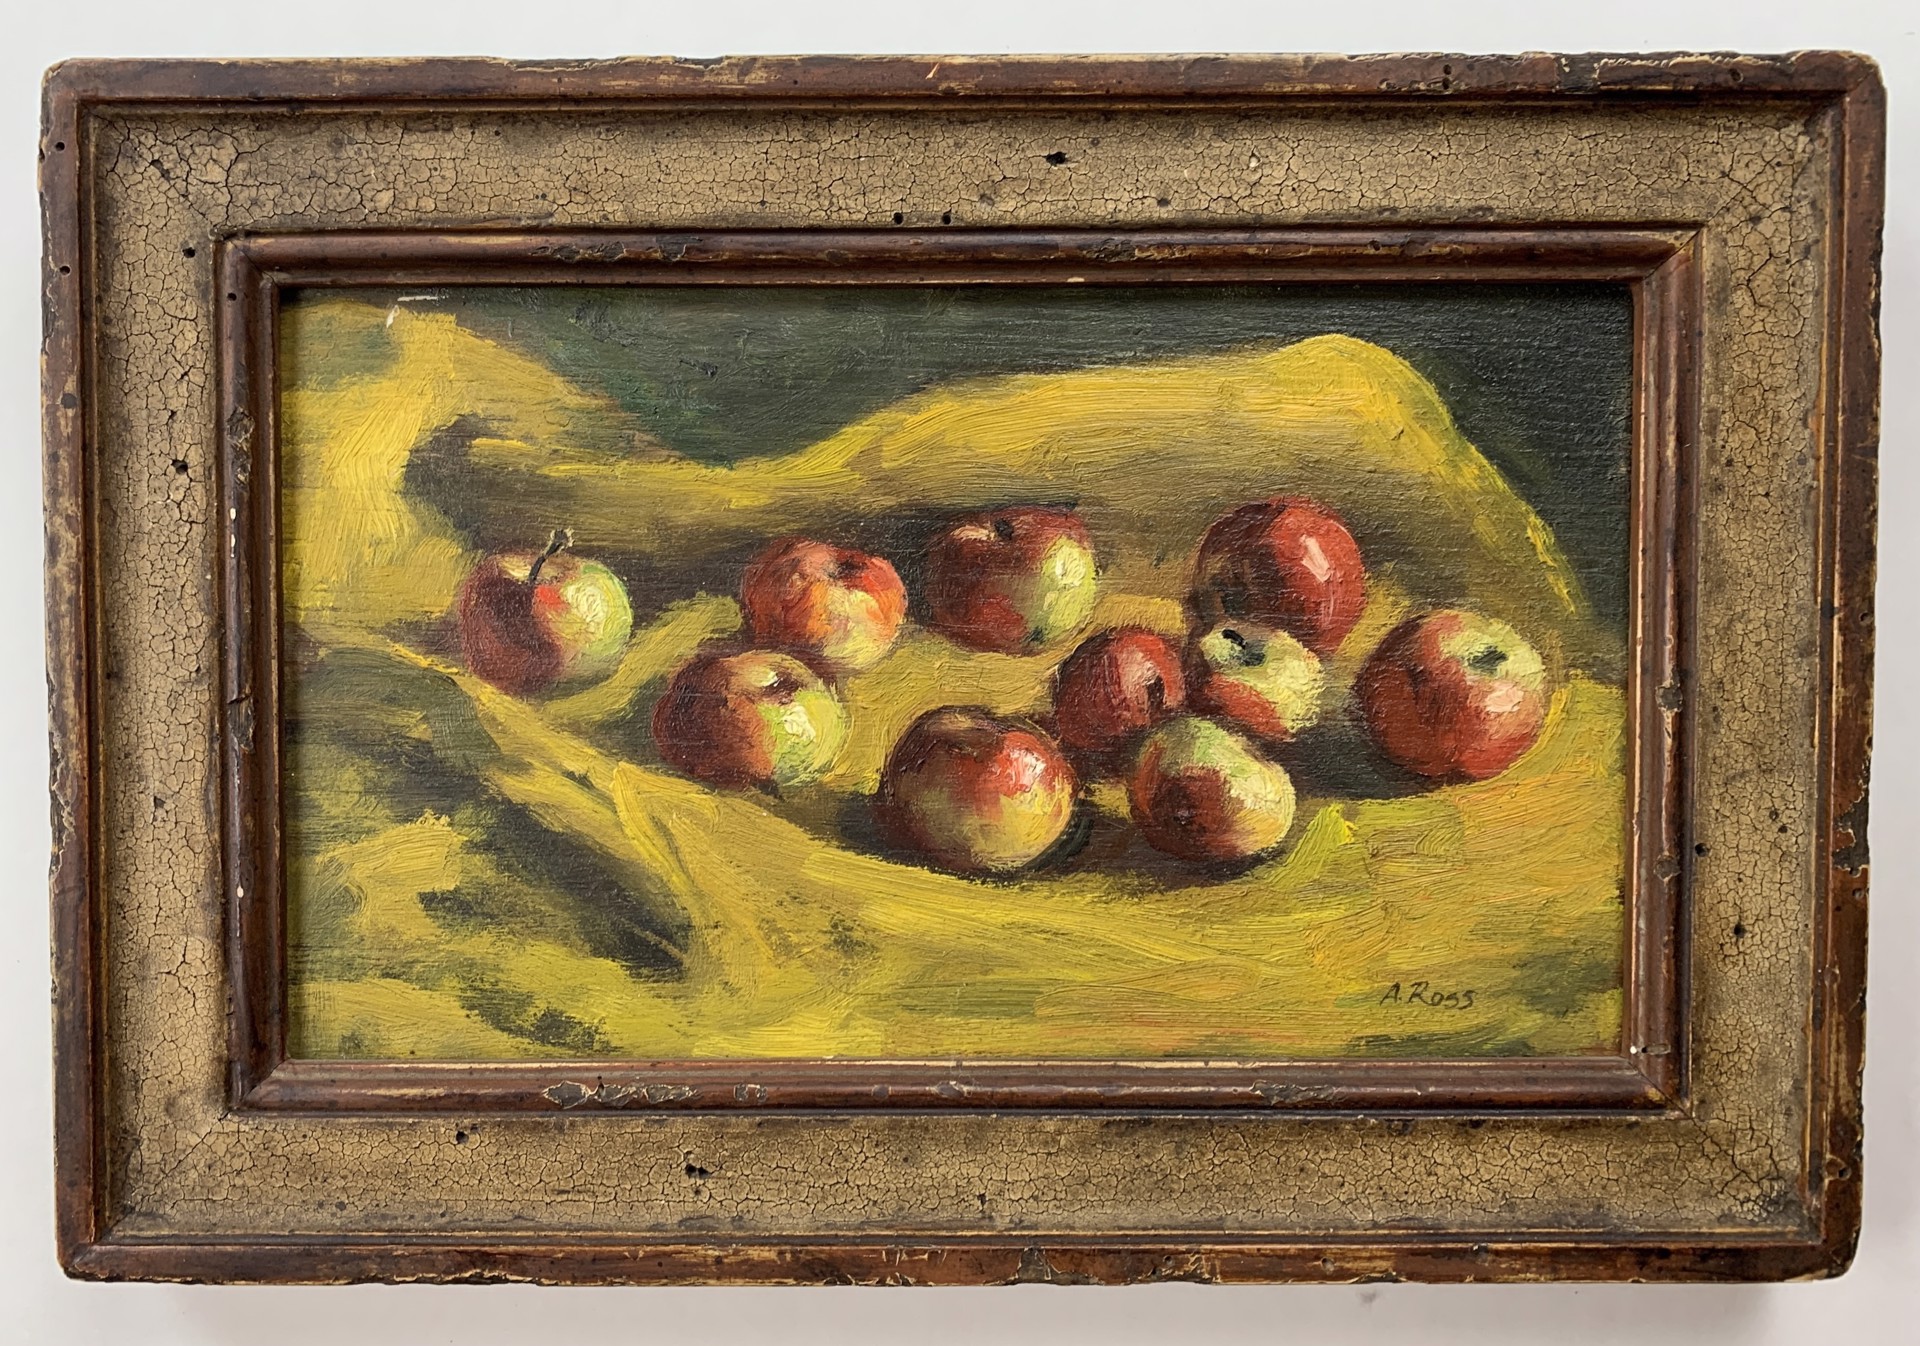 Crab Apples by Alvin Ross